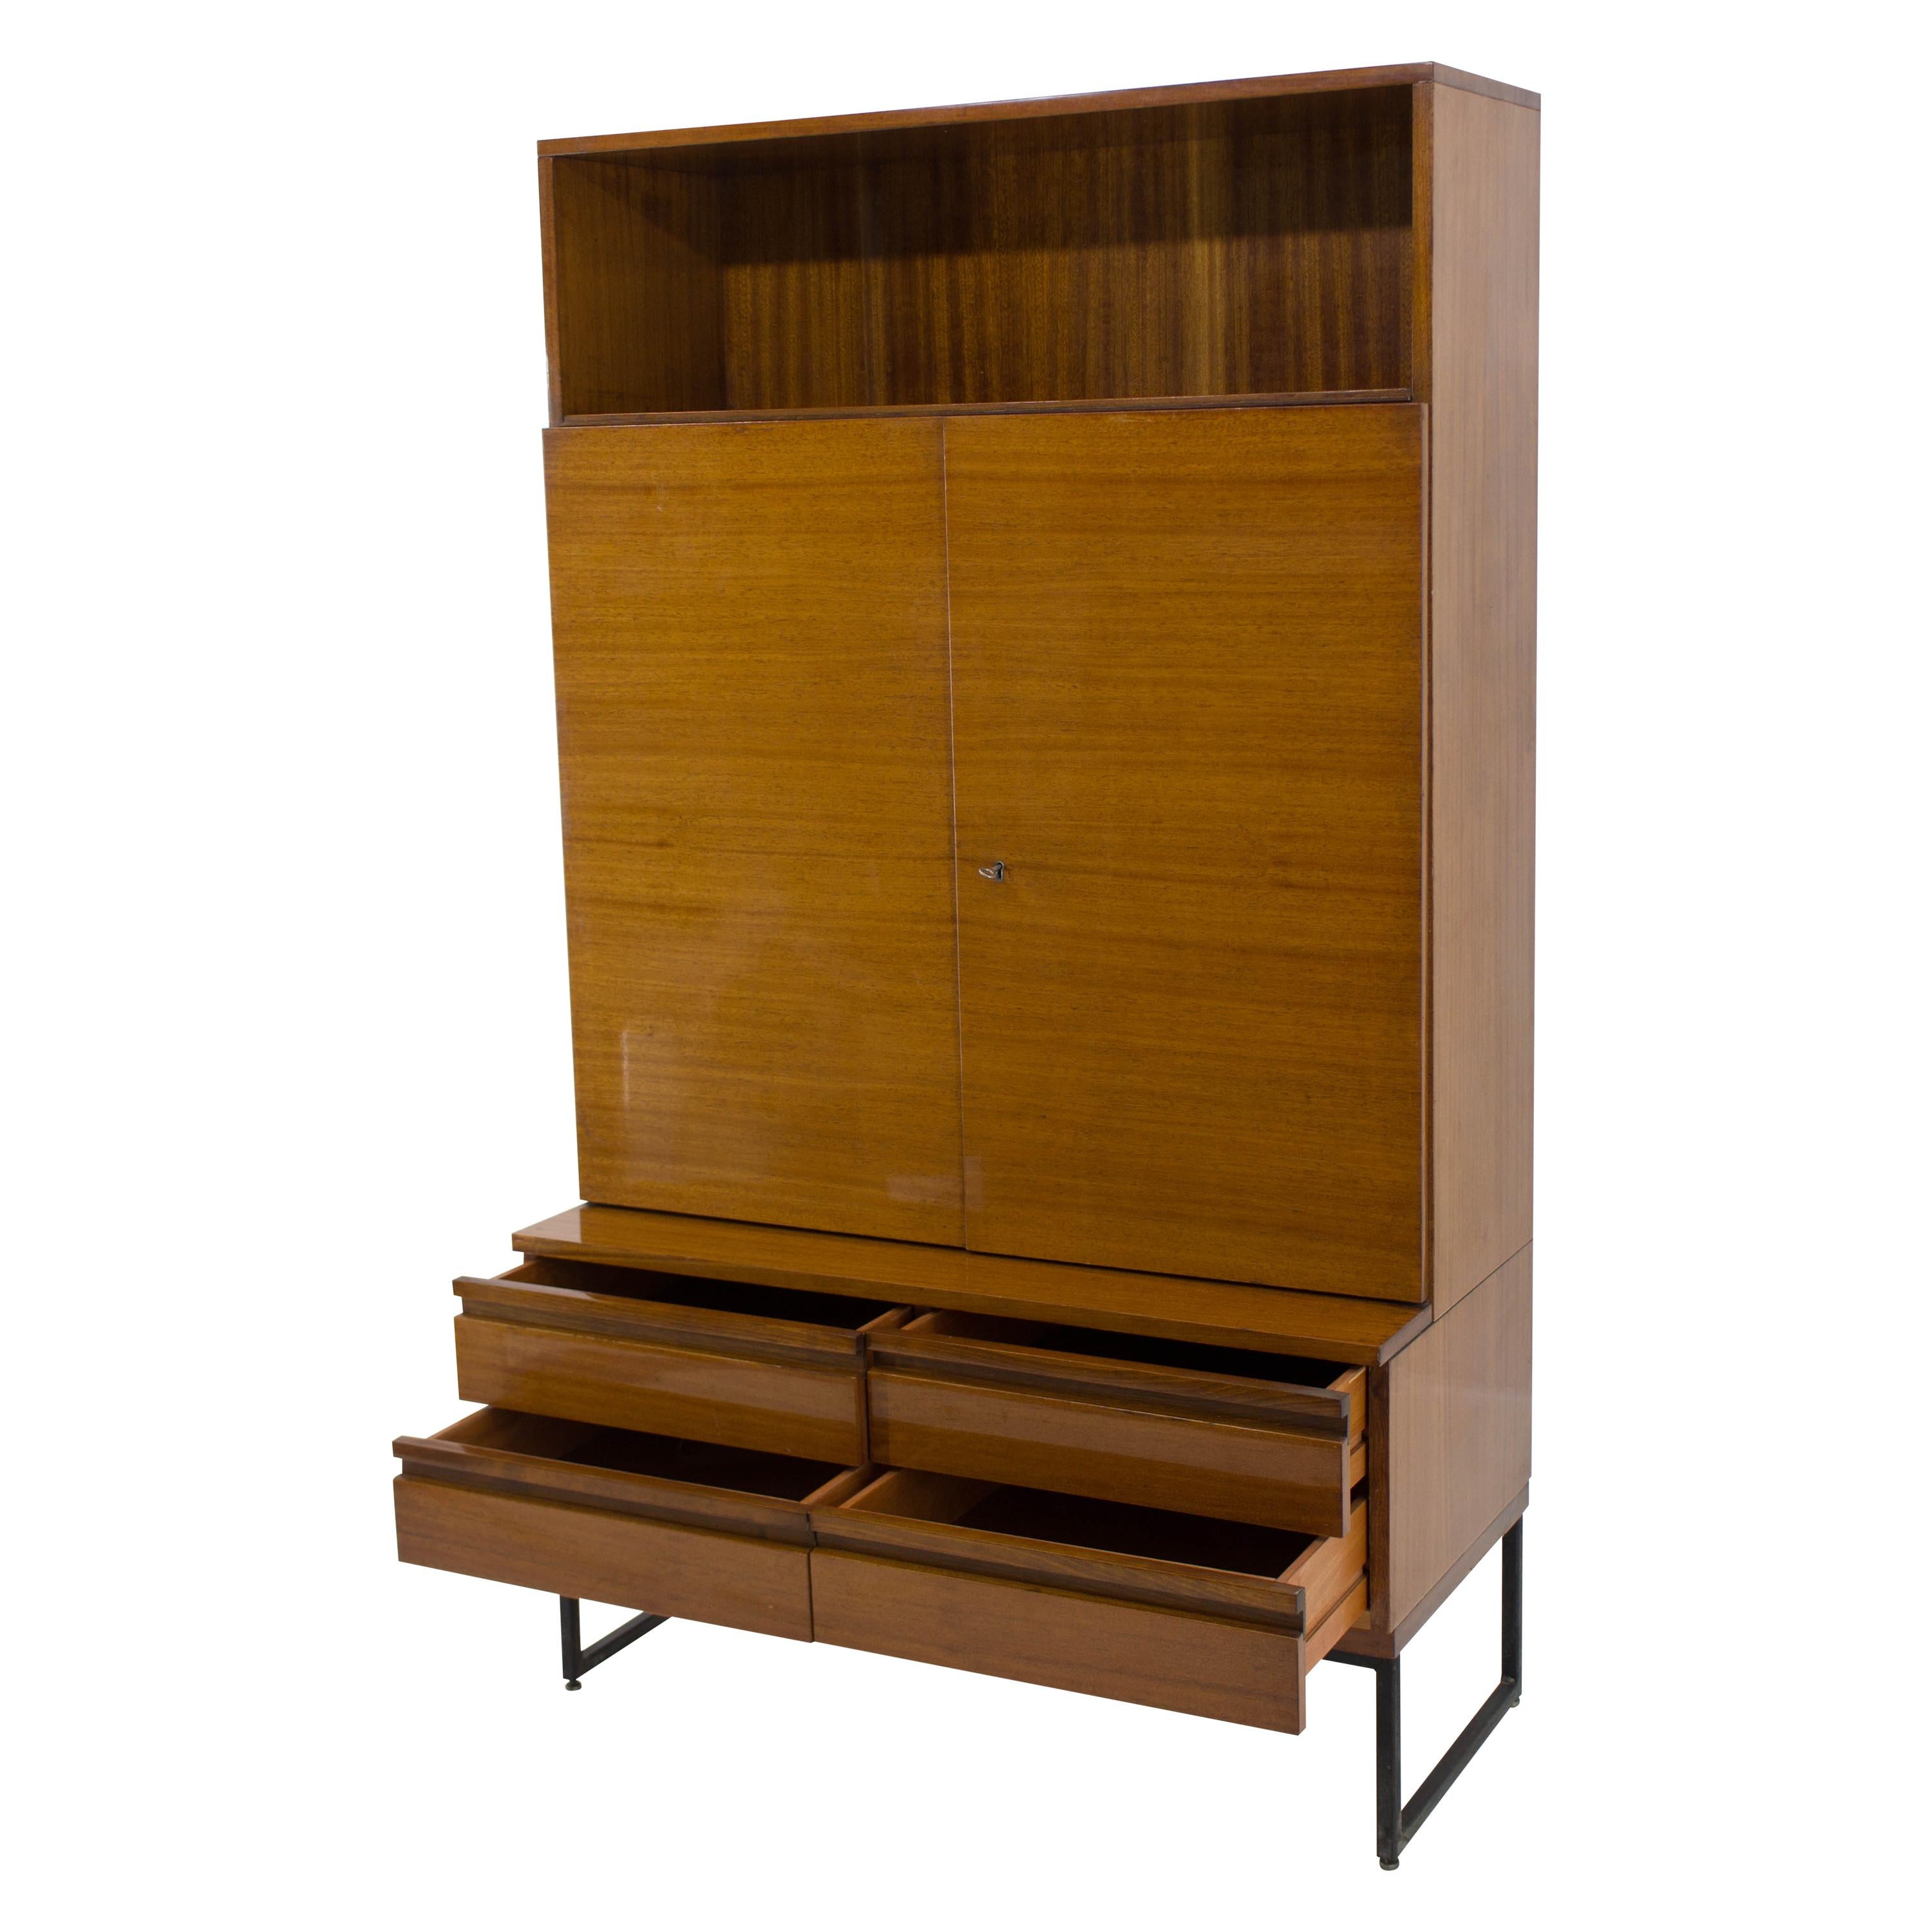 Belmondo Cabinet with Shelves and Drawers in High Gloss Finish, 1970